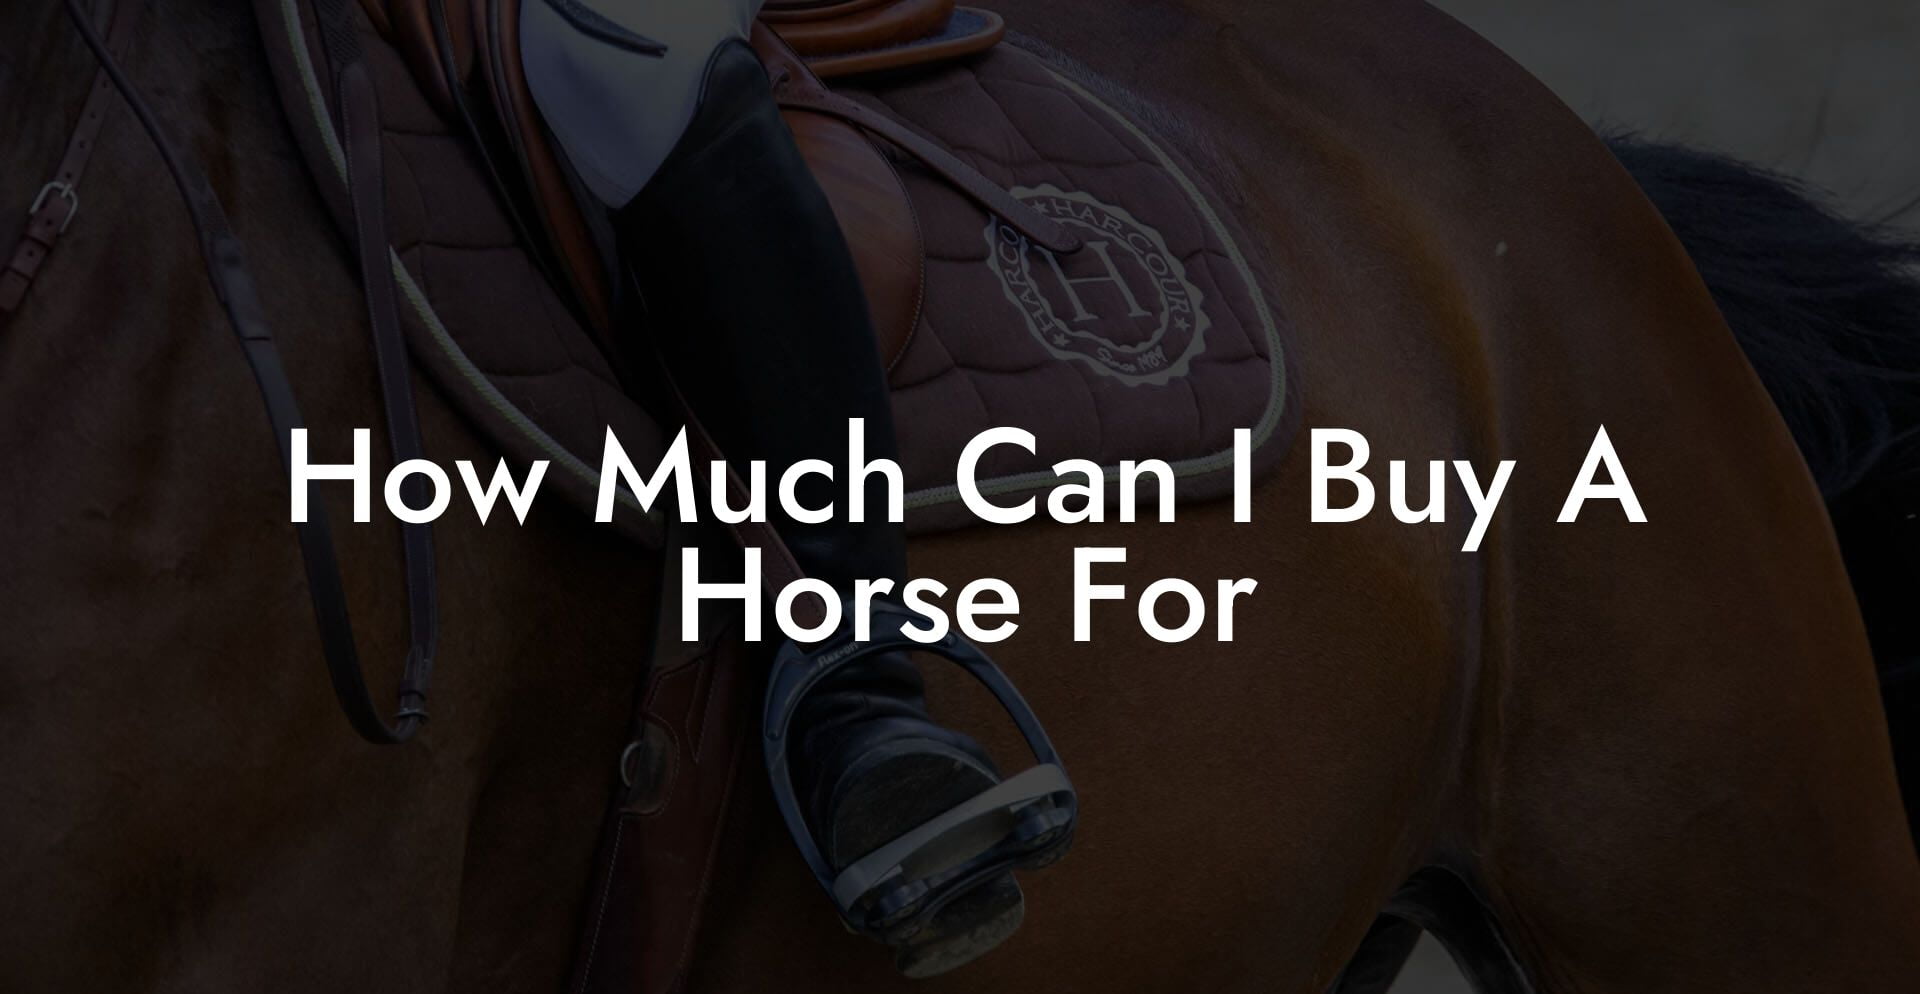 How Much Can I Buy A Horse For